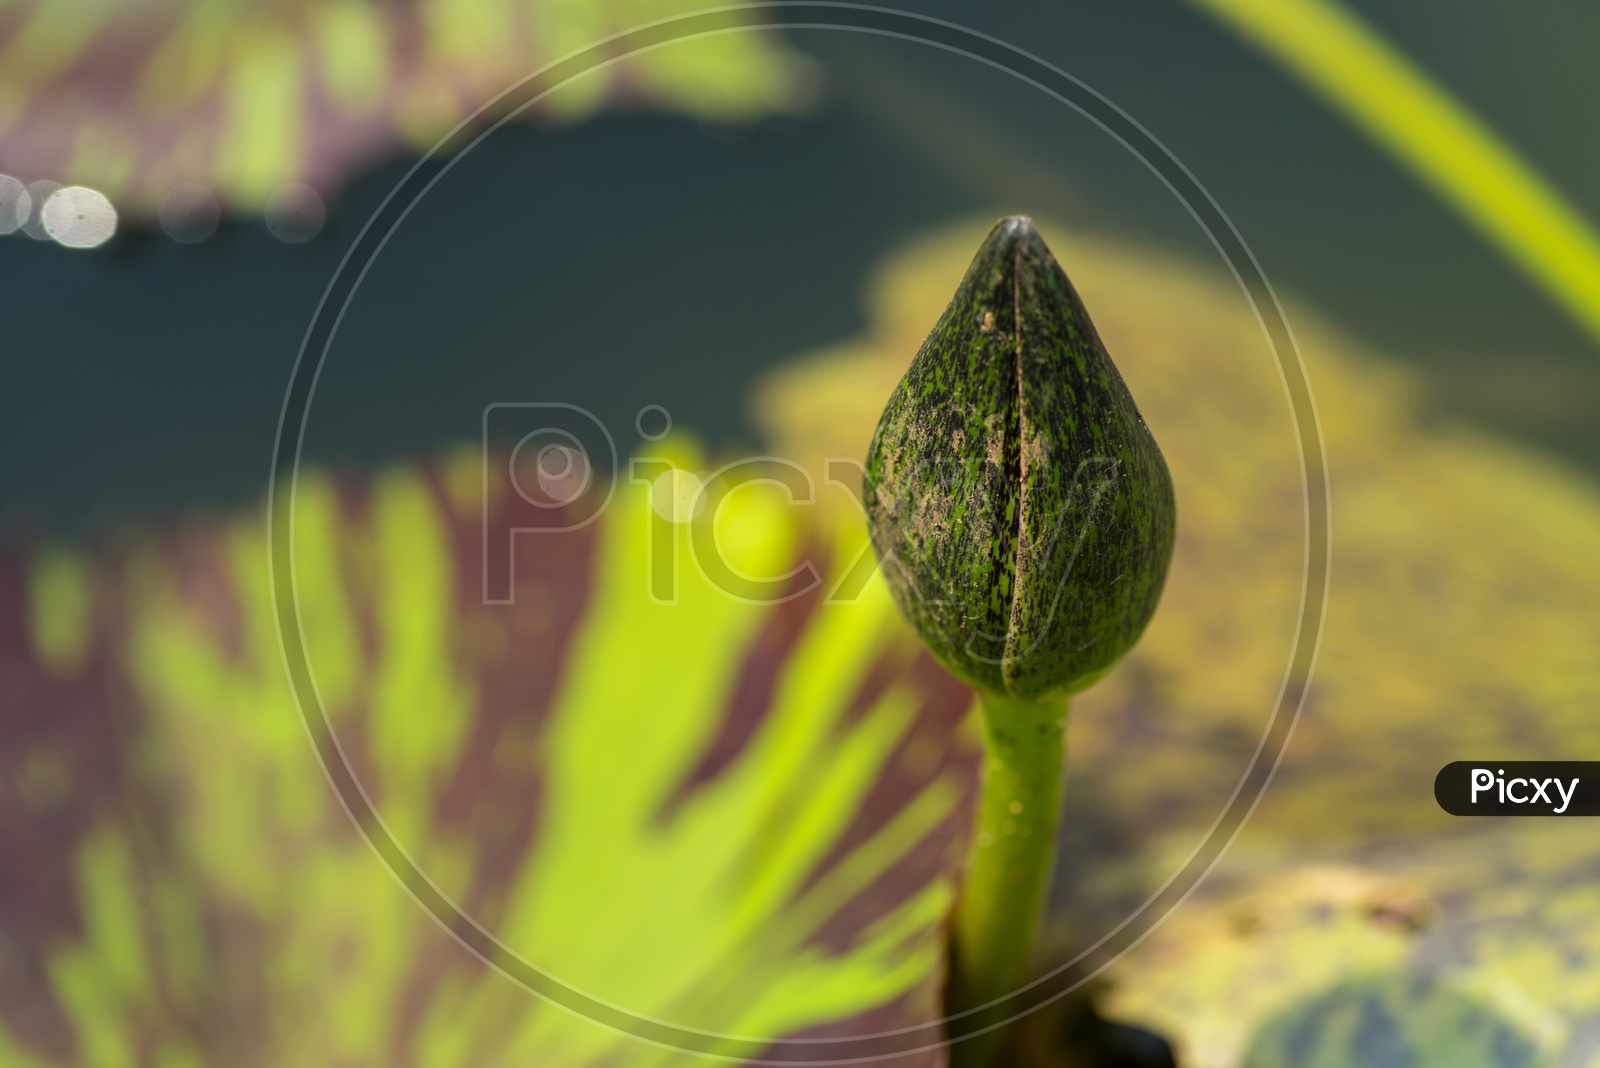 A Fresh Bud Of a Lotus Flower  in  a Water Pond